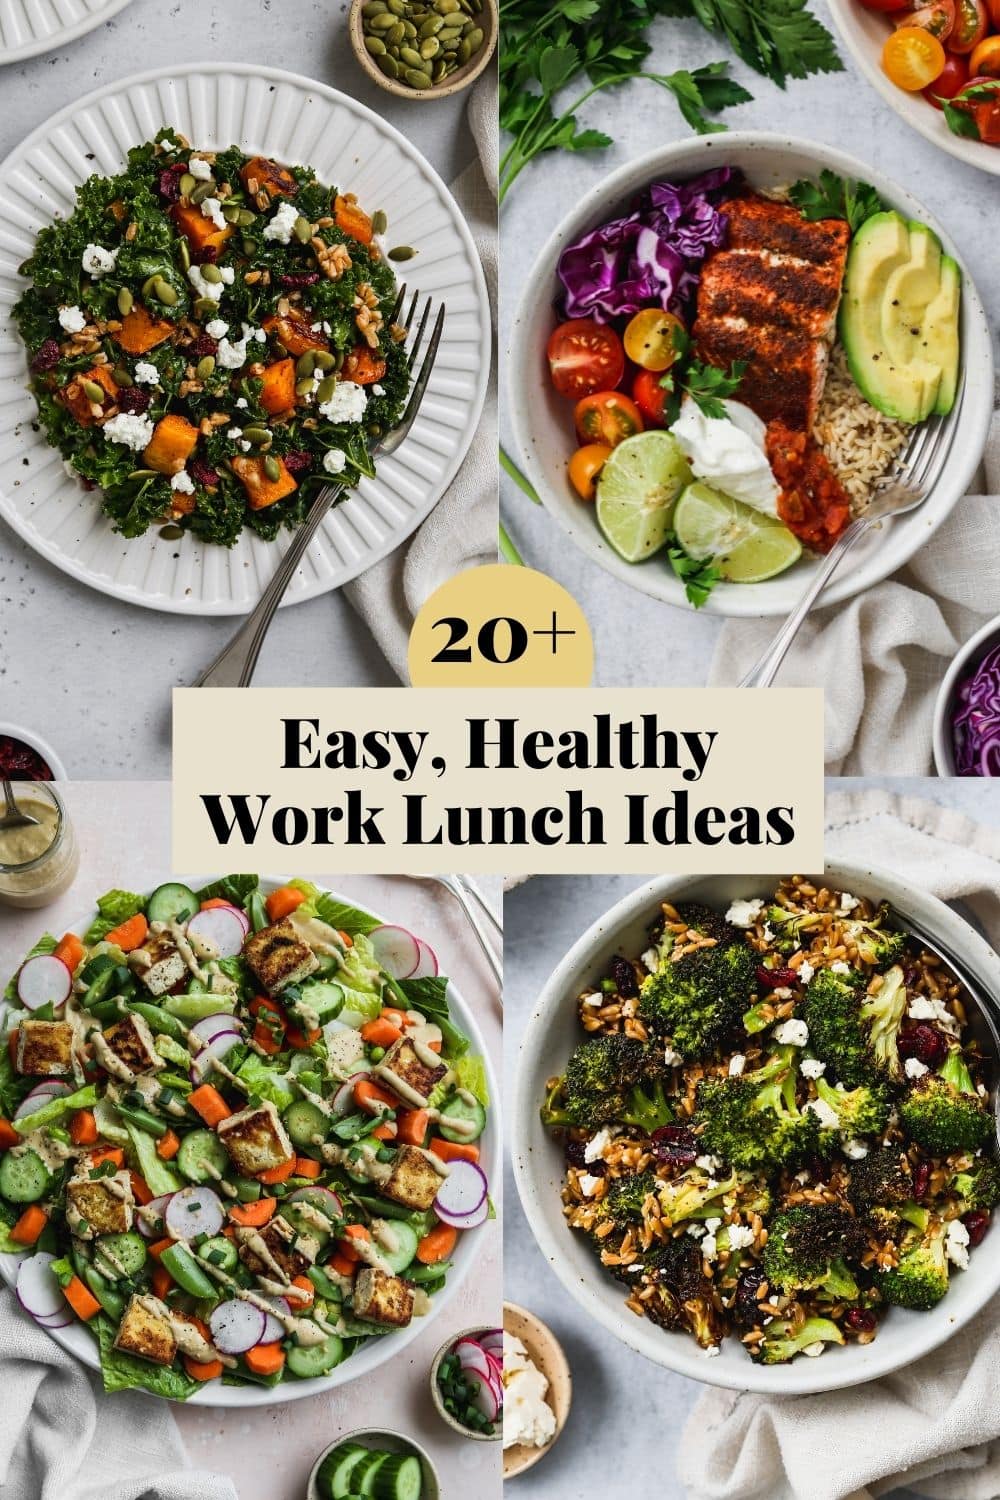 20+ Healthy Lunch Ideas To Pack For Work - Walder Wellness, Dietitian